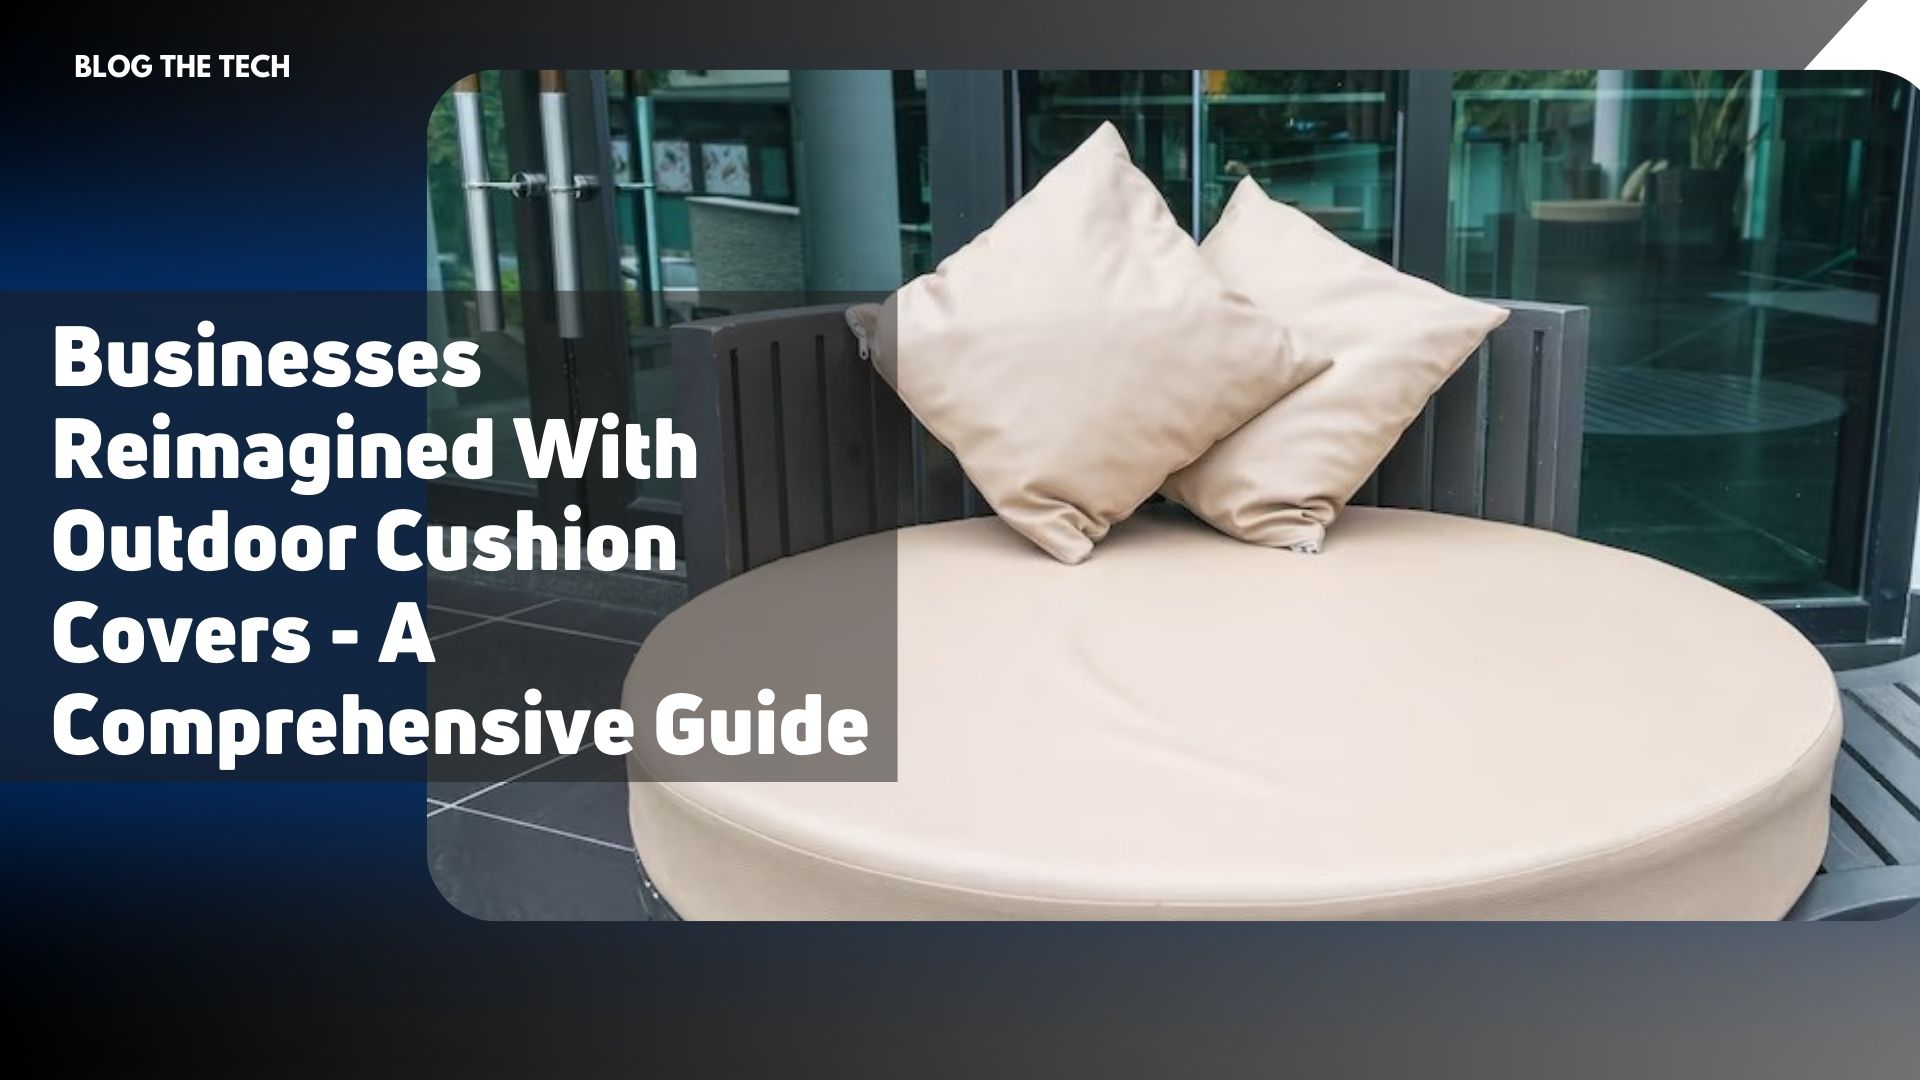 Businesses Reimagined With Outdoor Cushion Covers - A Comprehensive Guide